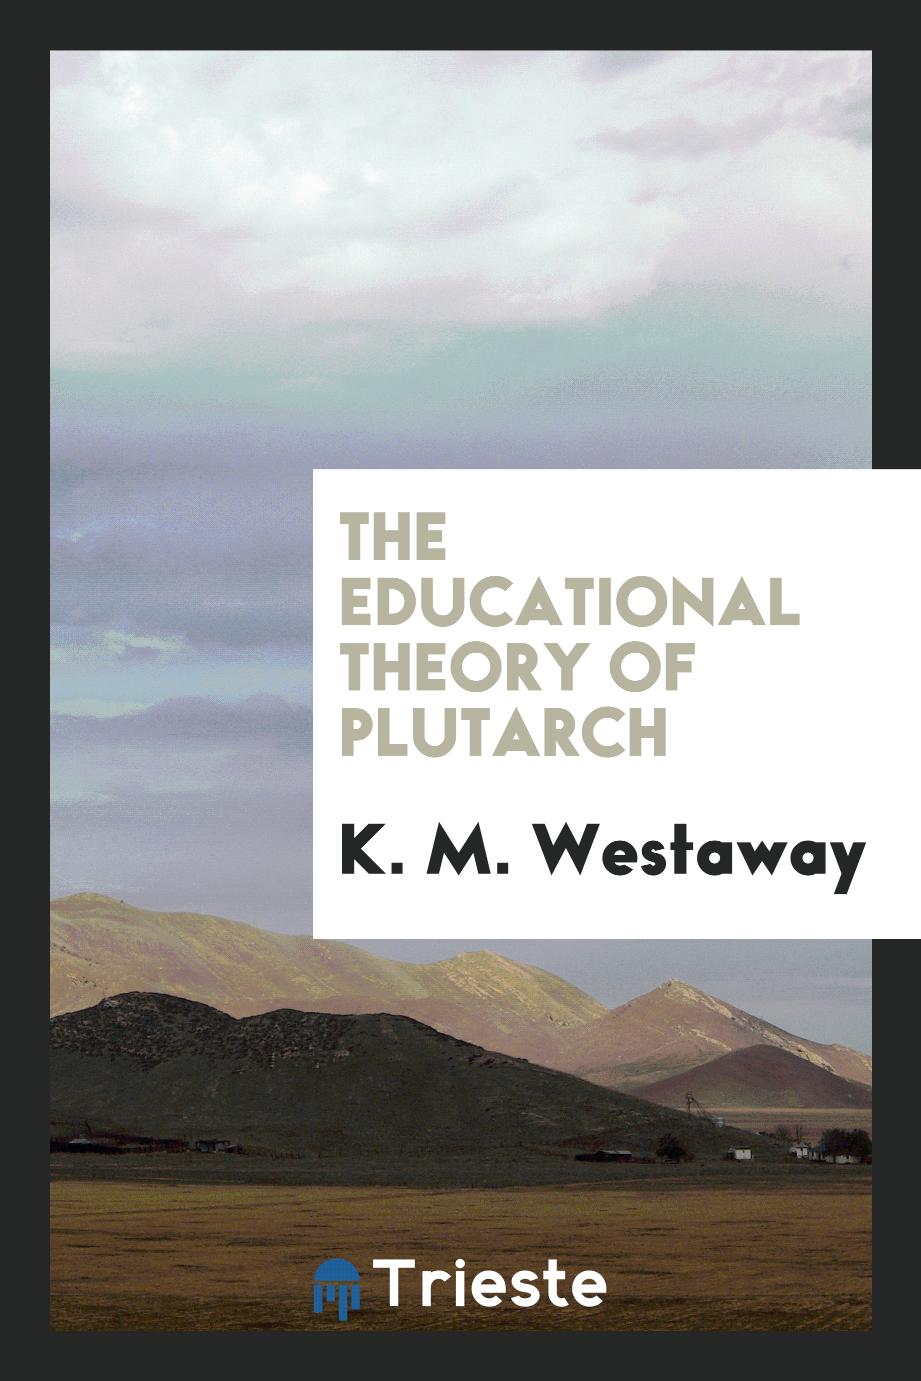 The educational theory of Plutarch